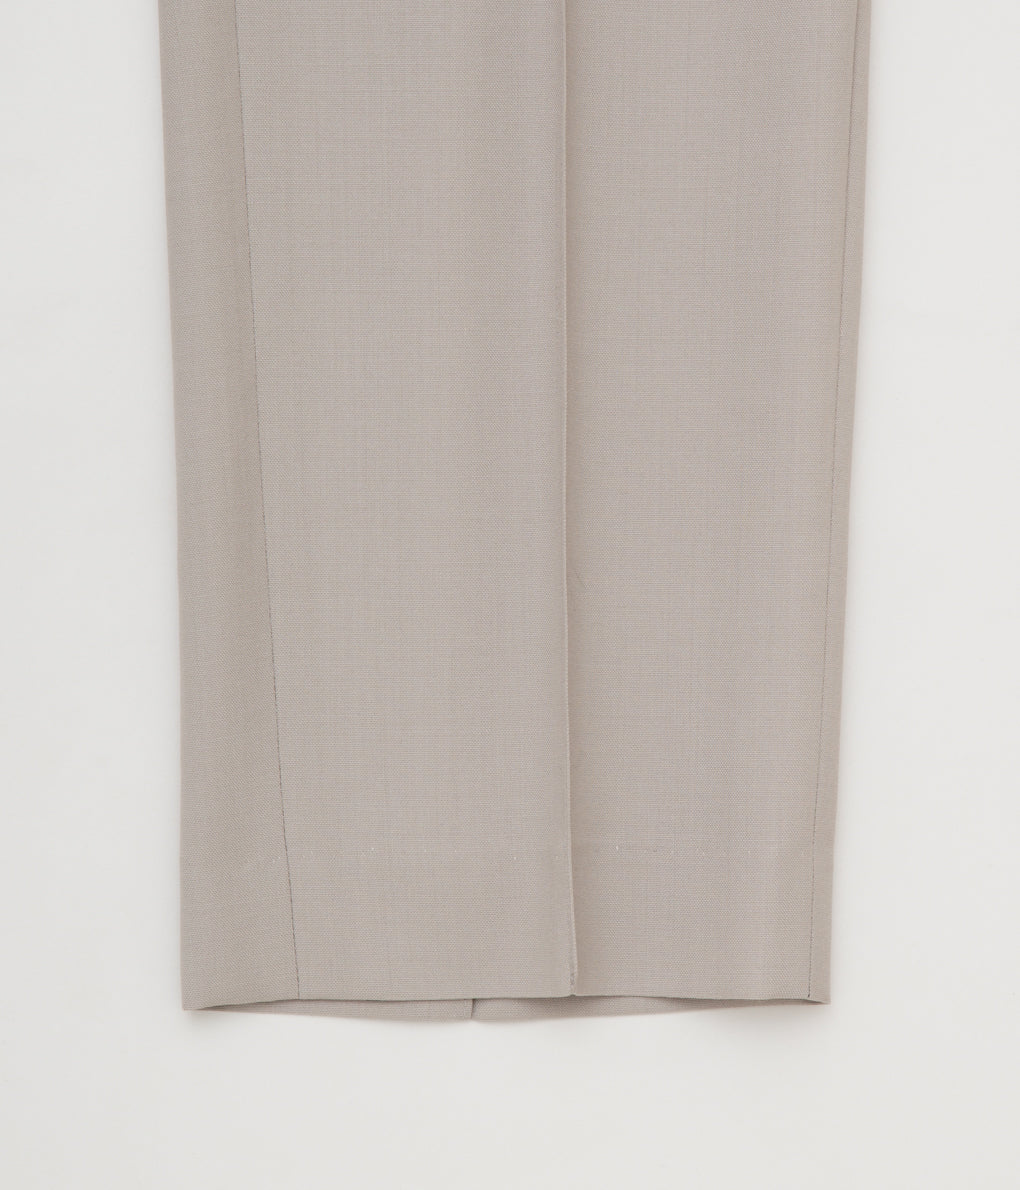 POSTELEGANT "WOOL EASY TROUSERS"(LIGHT TAUPE)